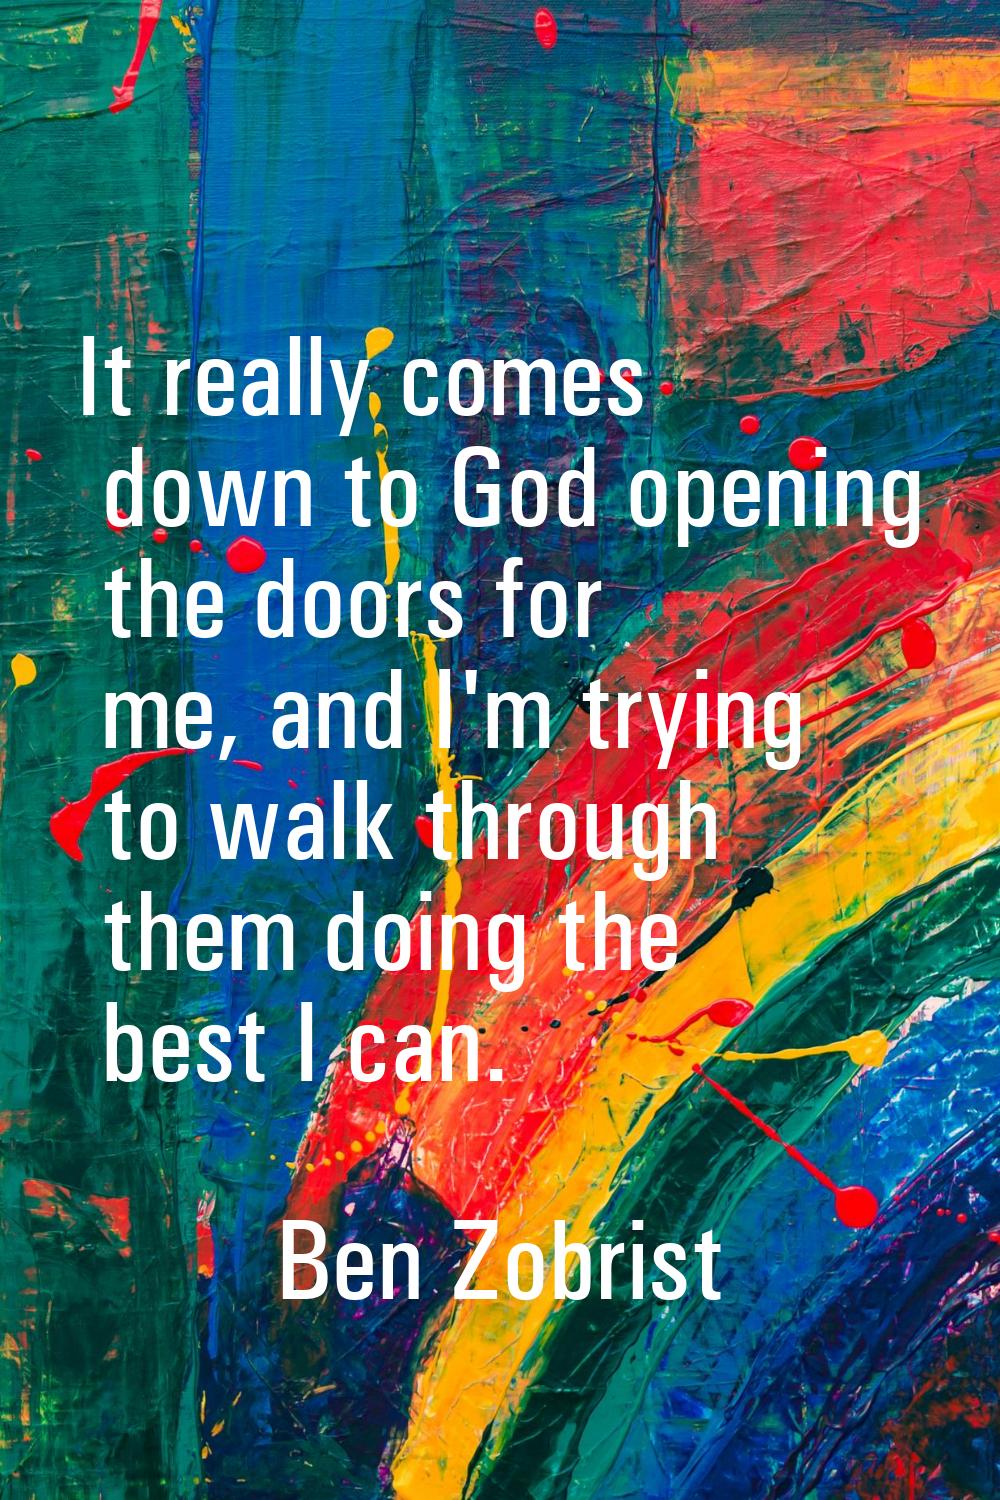 It really comes down to God opening the doors for me, and I'm trying to walk through them doing the